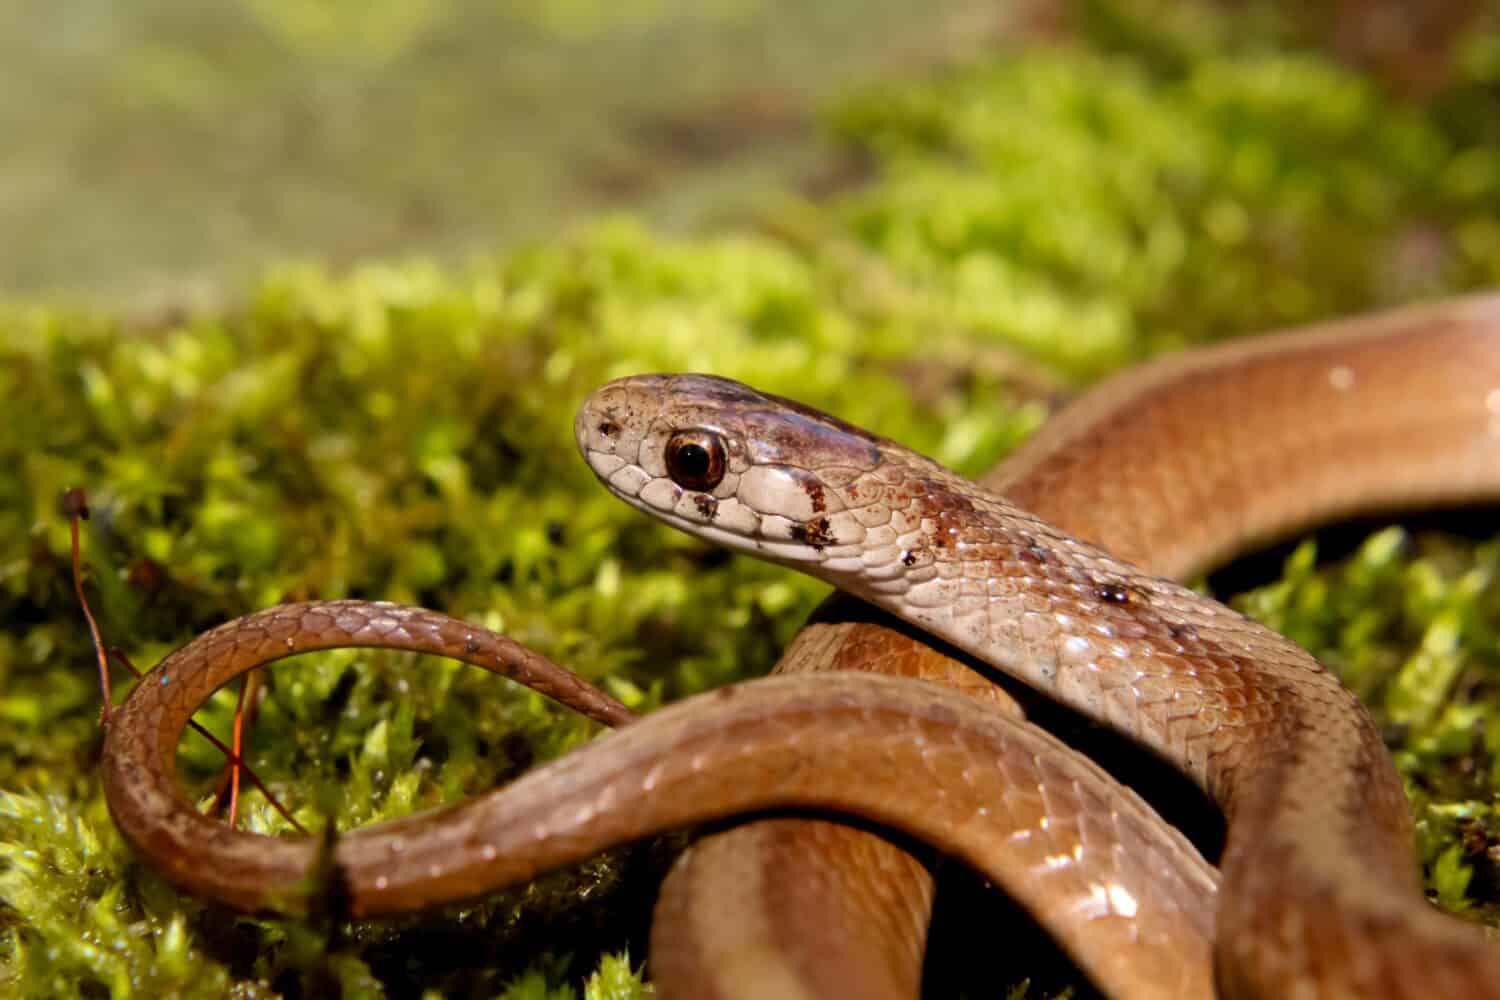 a dekay's brown snake on green moss, they are non venomous, scientific name Storeria dekayi